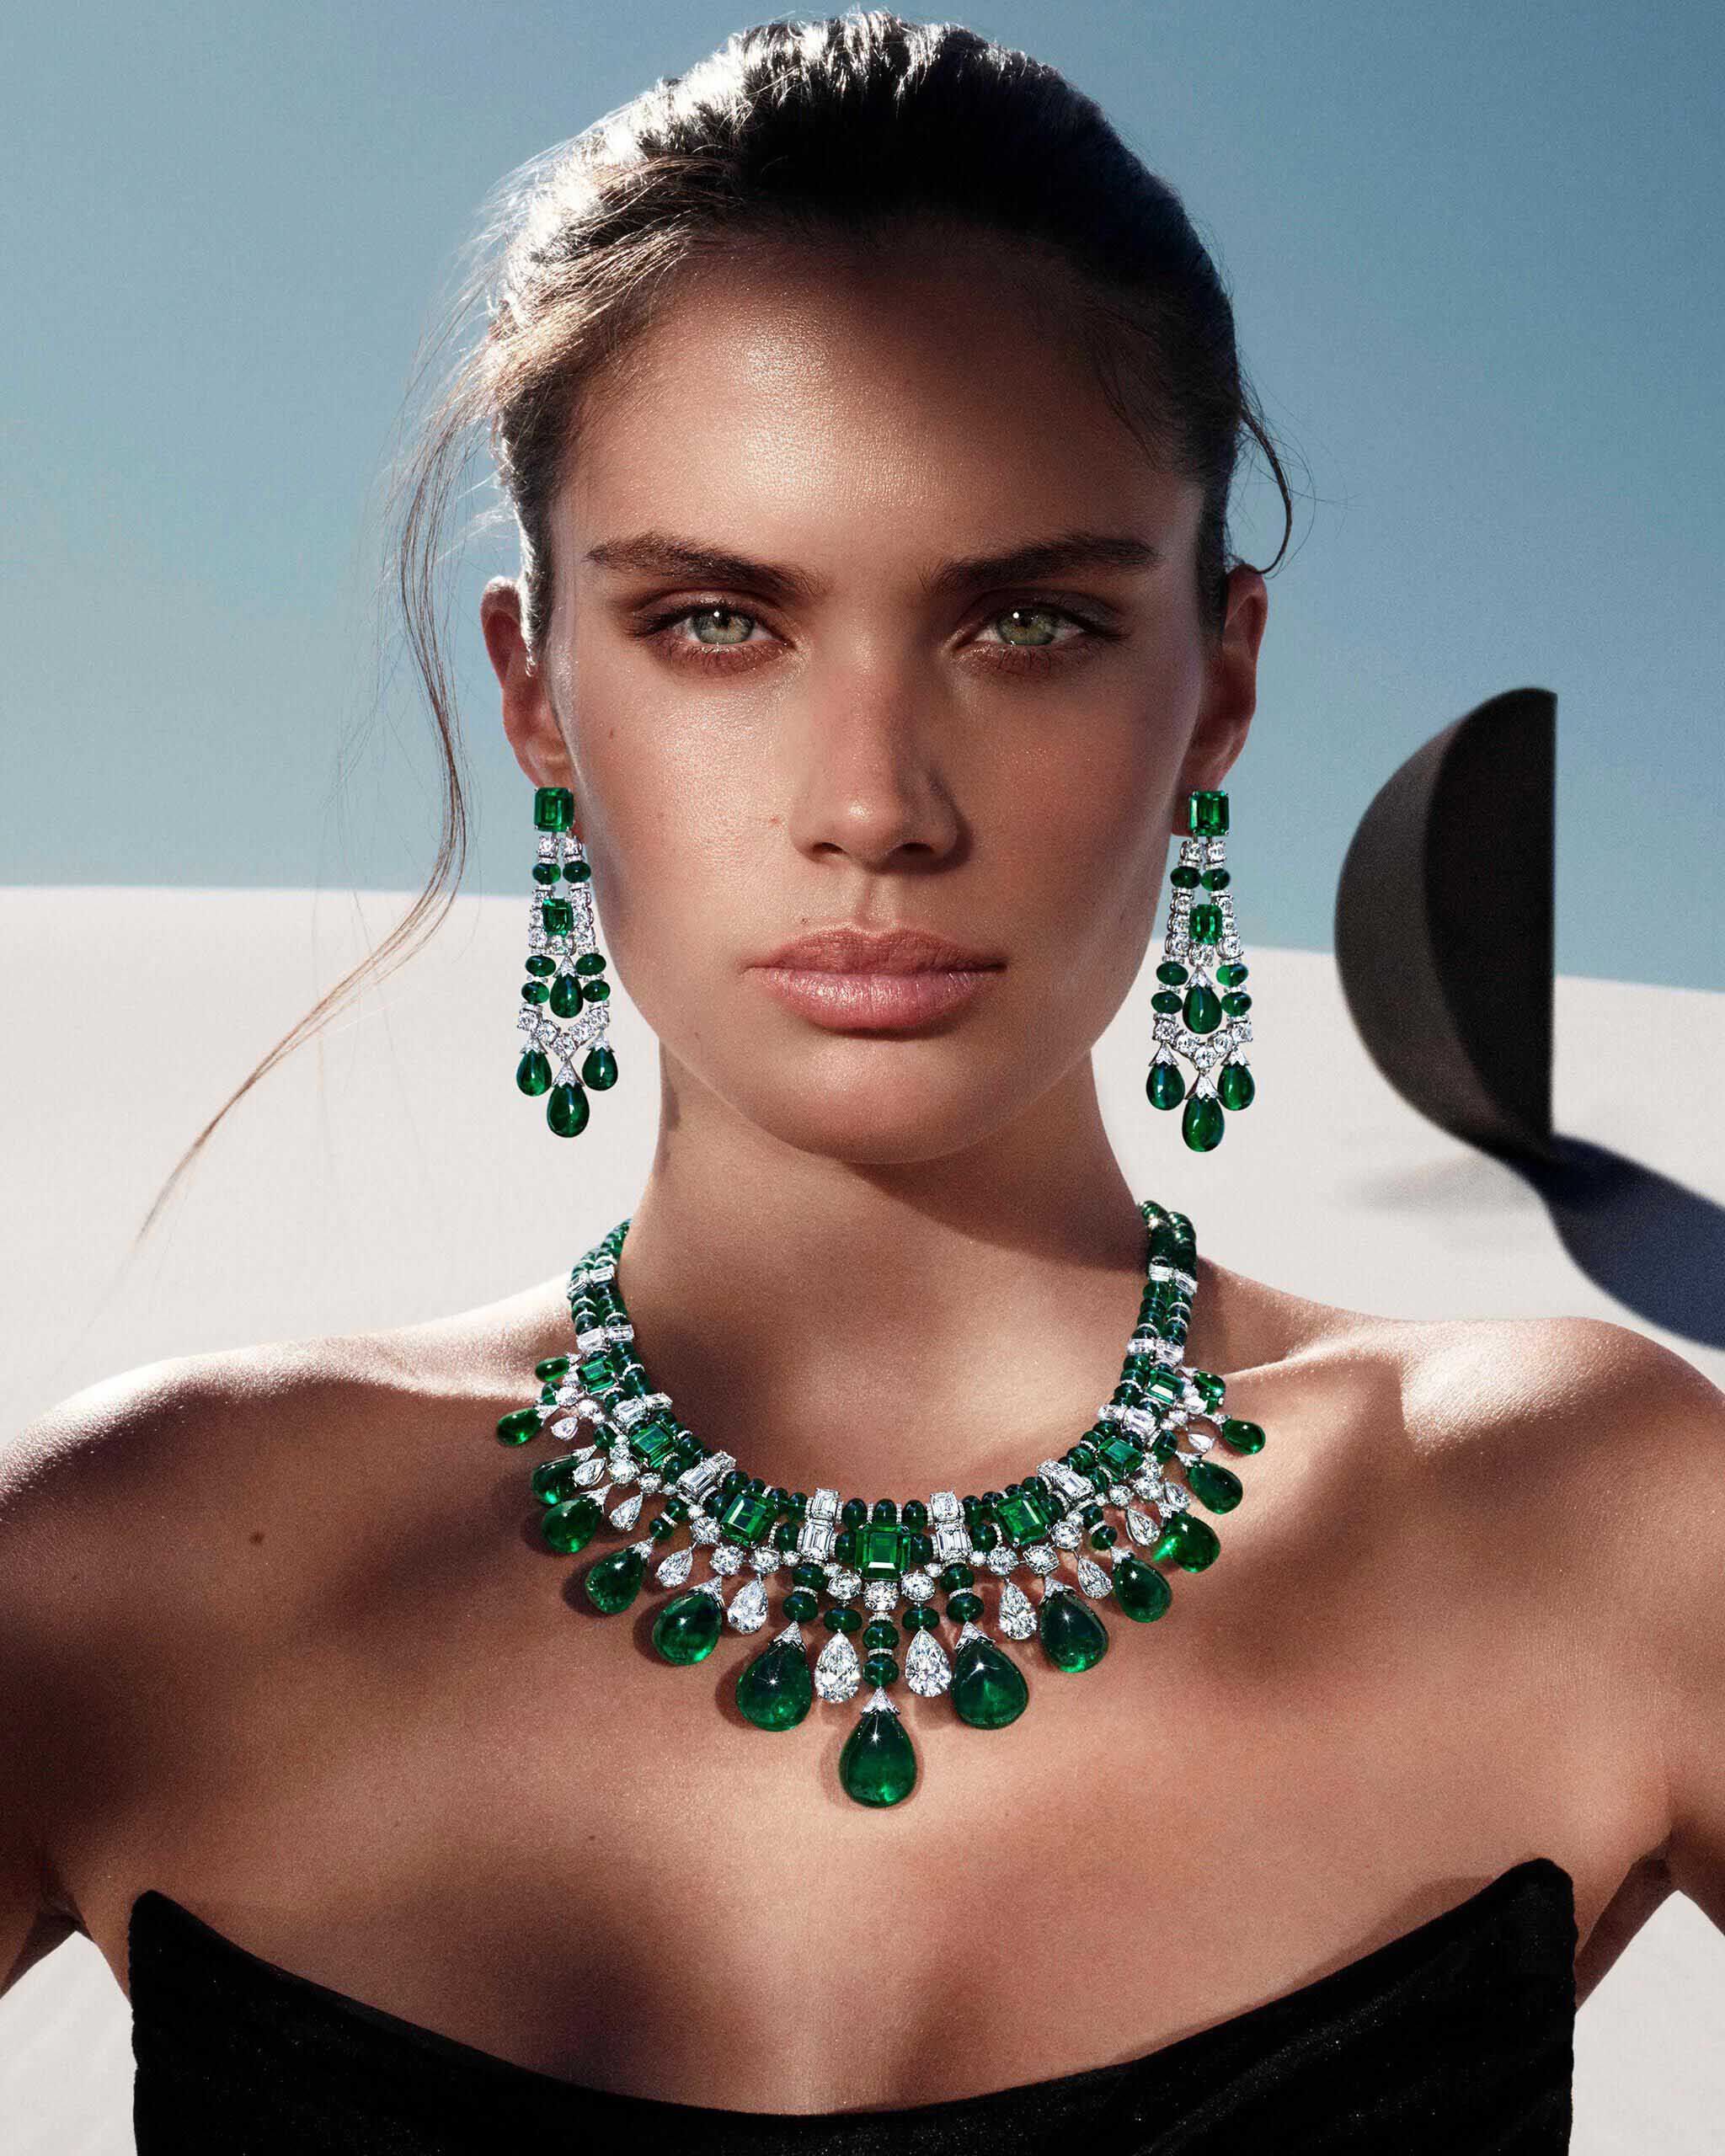 Model wears the Graff Tribal collection emerald and diamond diamond high jewellery earrings and necklace